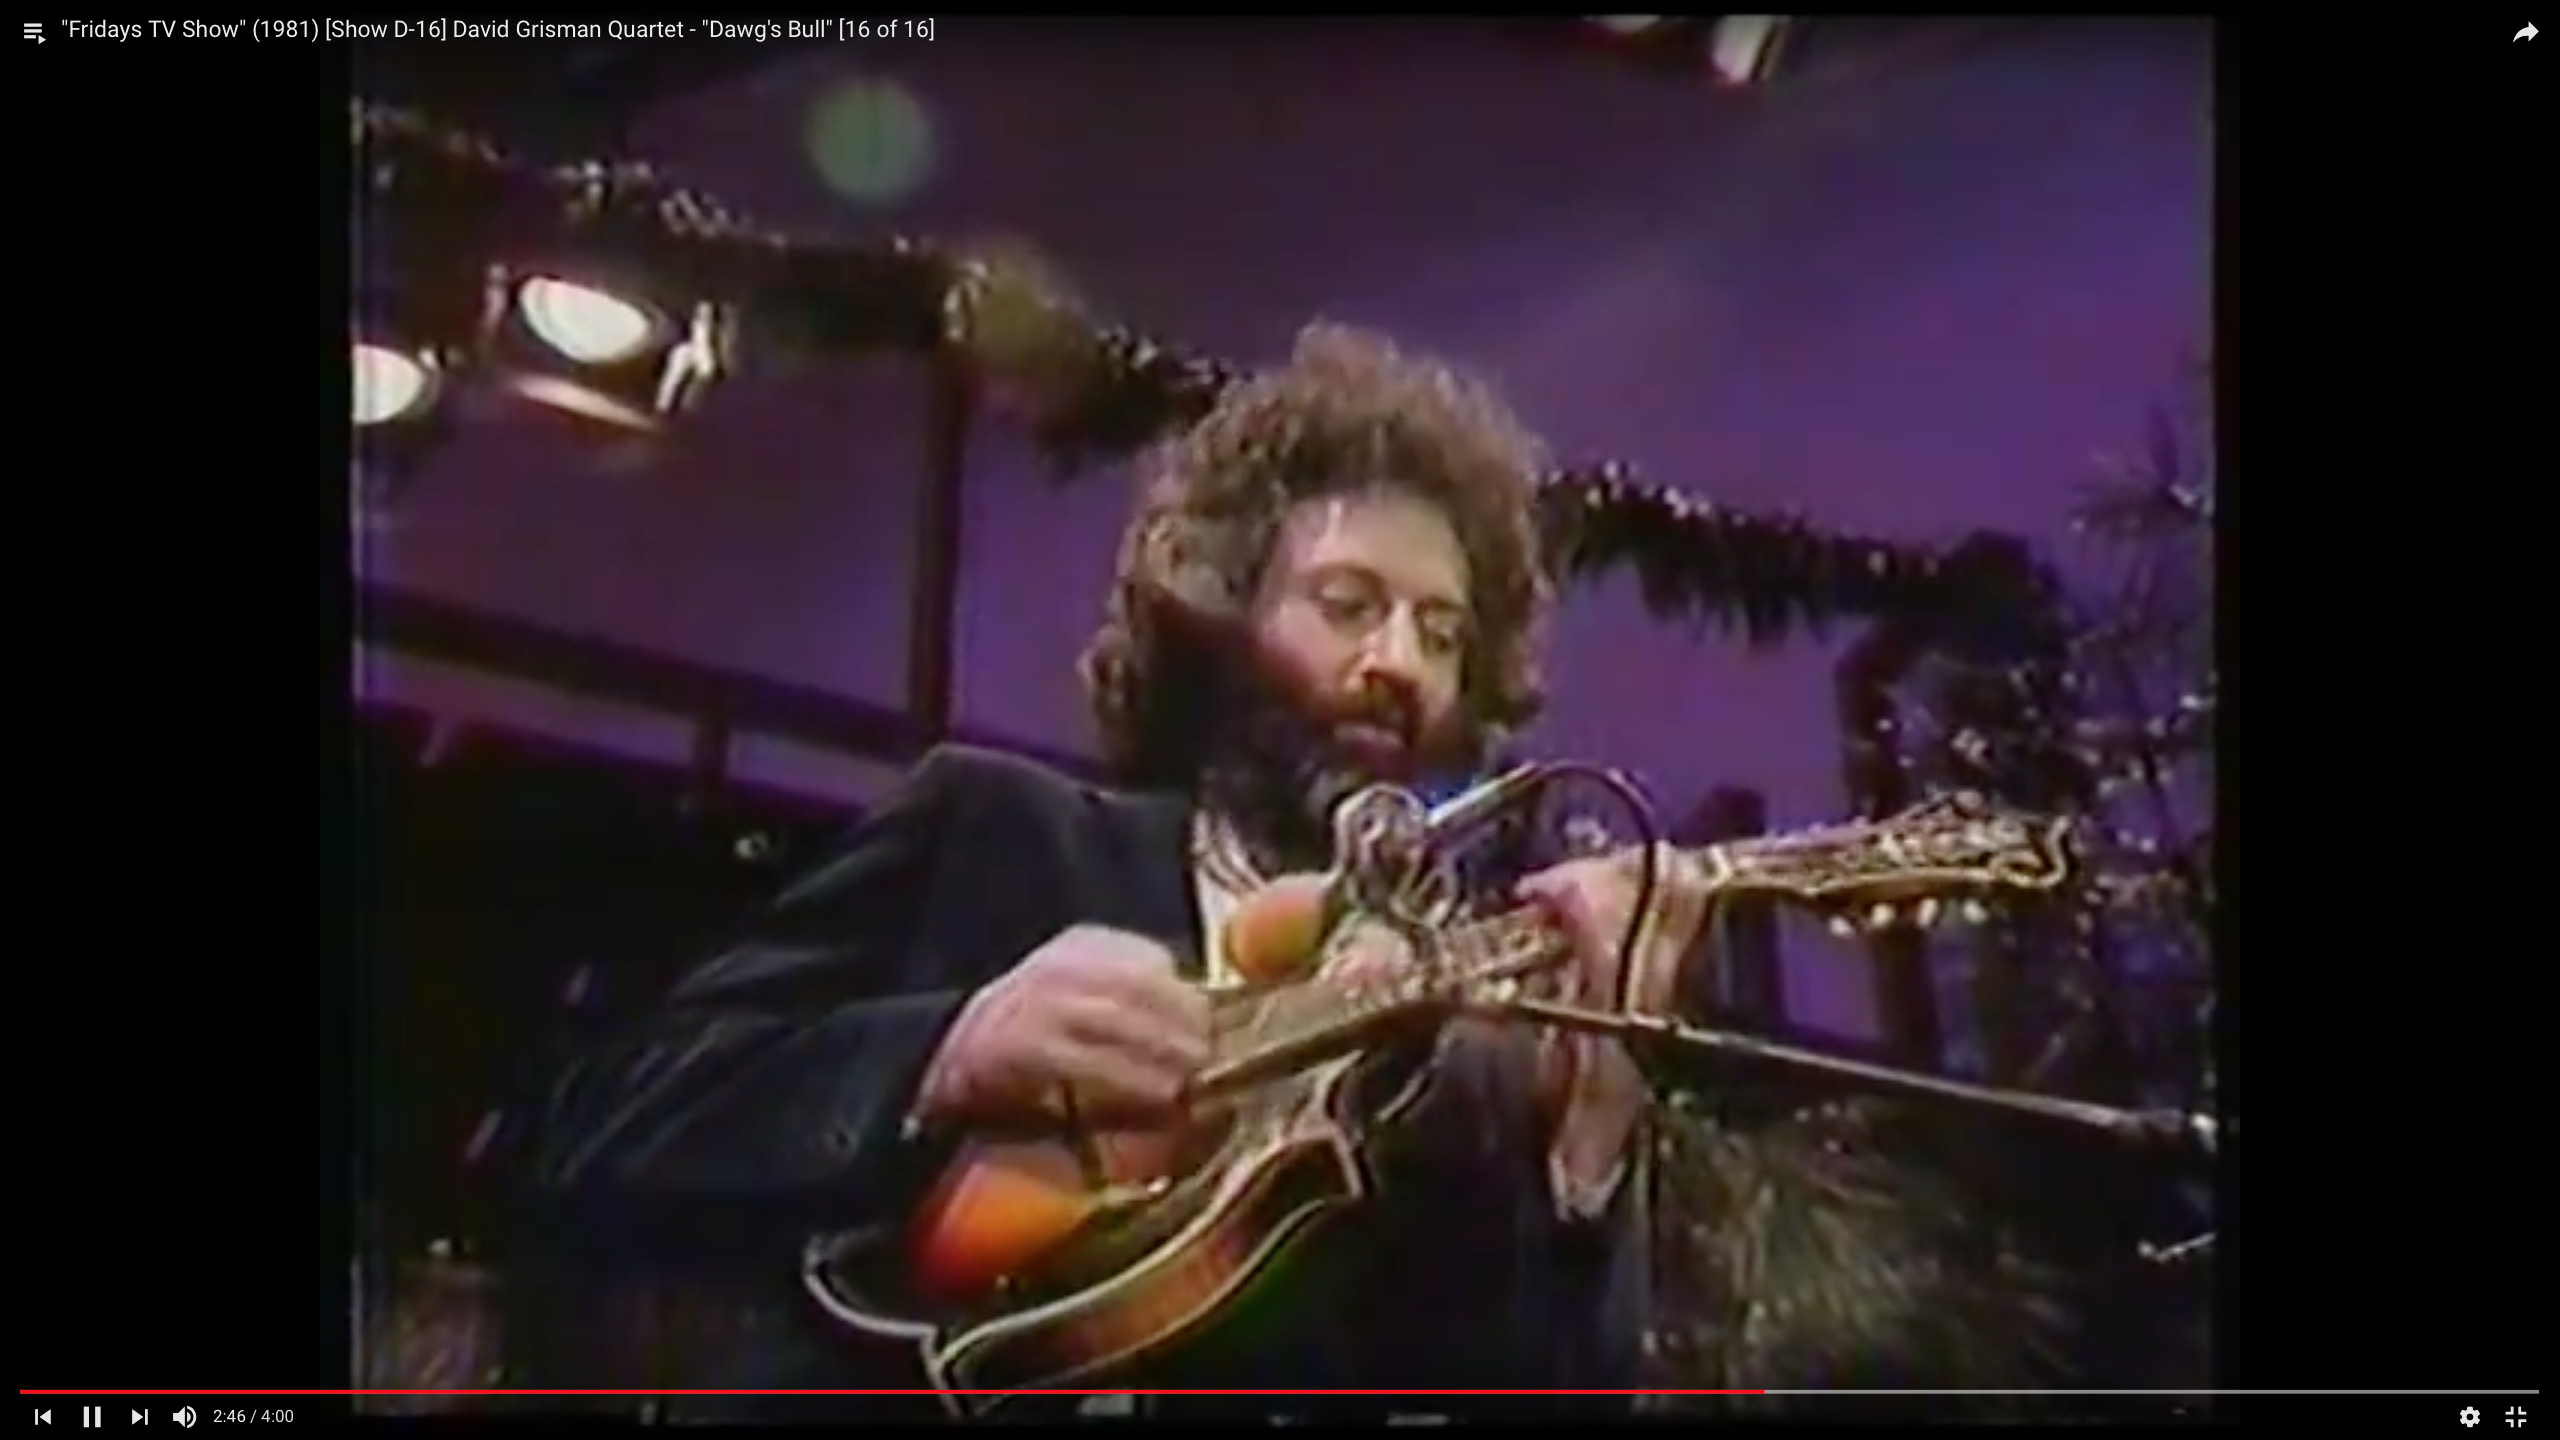 Photo of David Grisman playing the mandolin in 1981 on The Friday Club